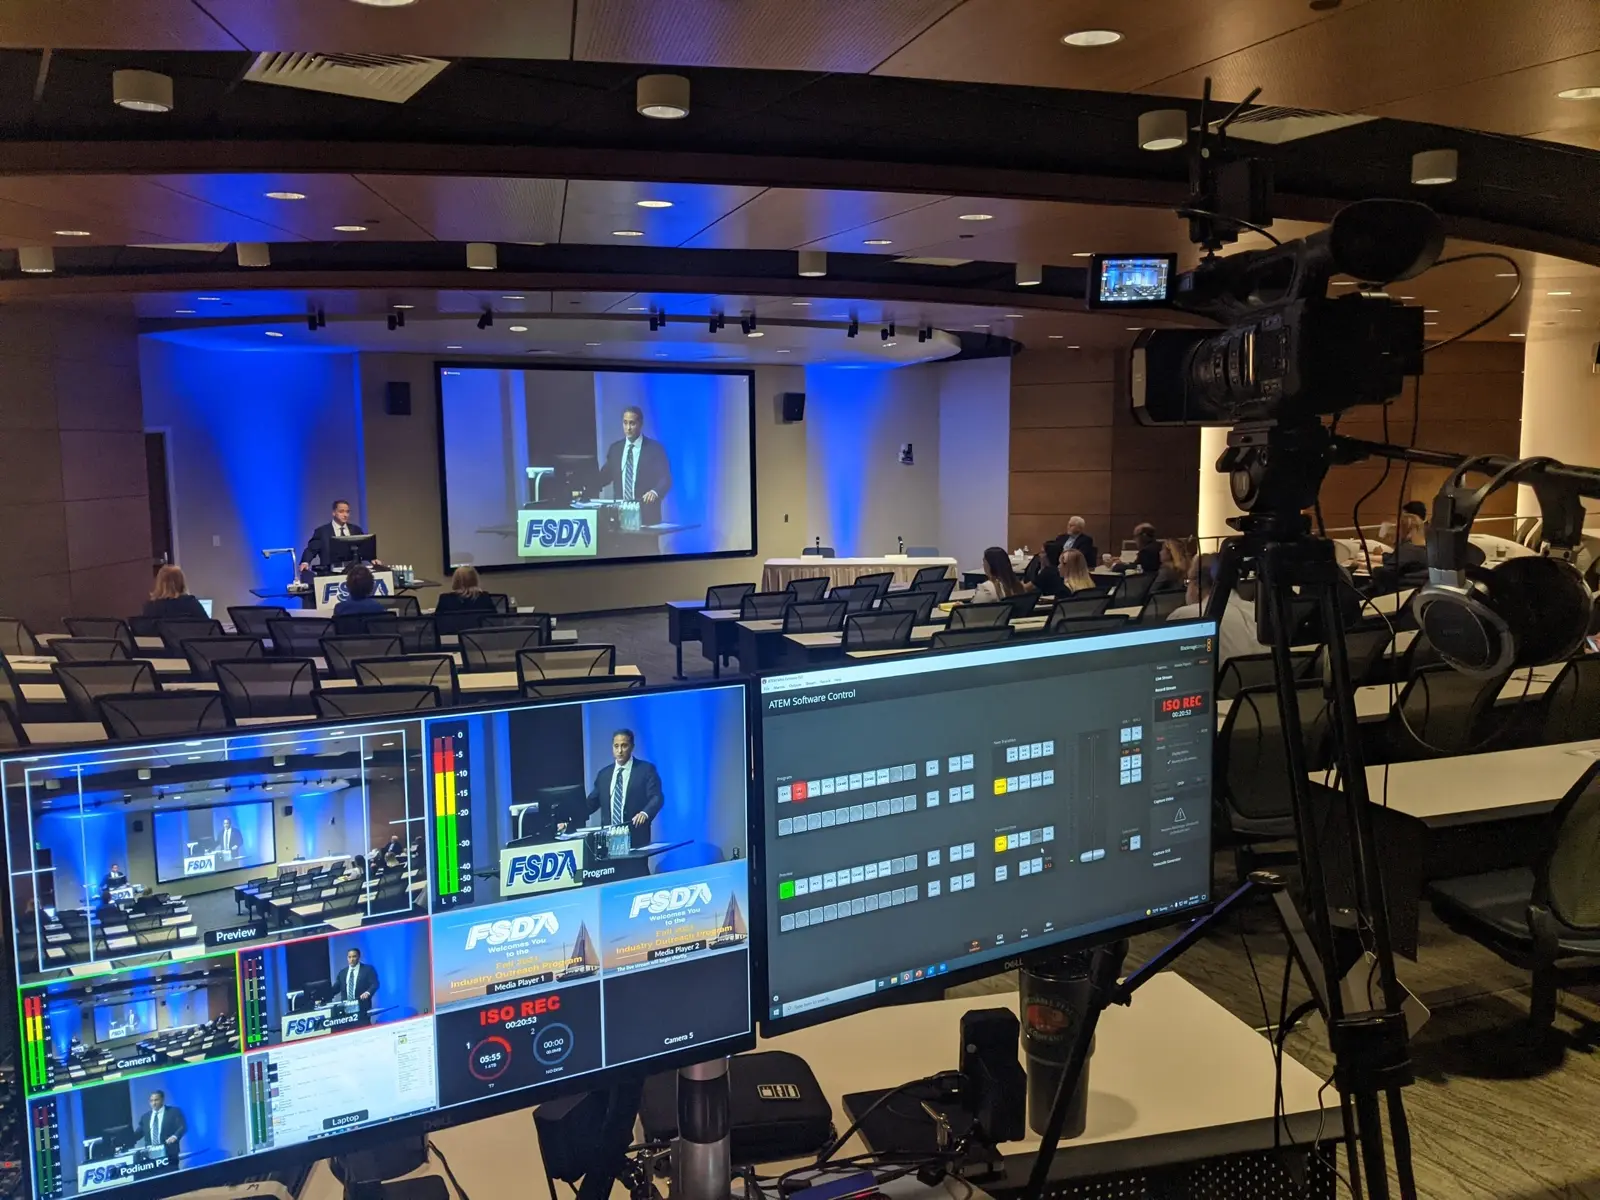 CAMLS Image of a conference room with a speaker presenting on stage to a seated audience. Multiple camera setups and a control station with monitors show the presentation being recorded or live-streamed. The speaker is displayed on a large screen behind them, surrounded by blue lights.